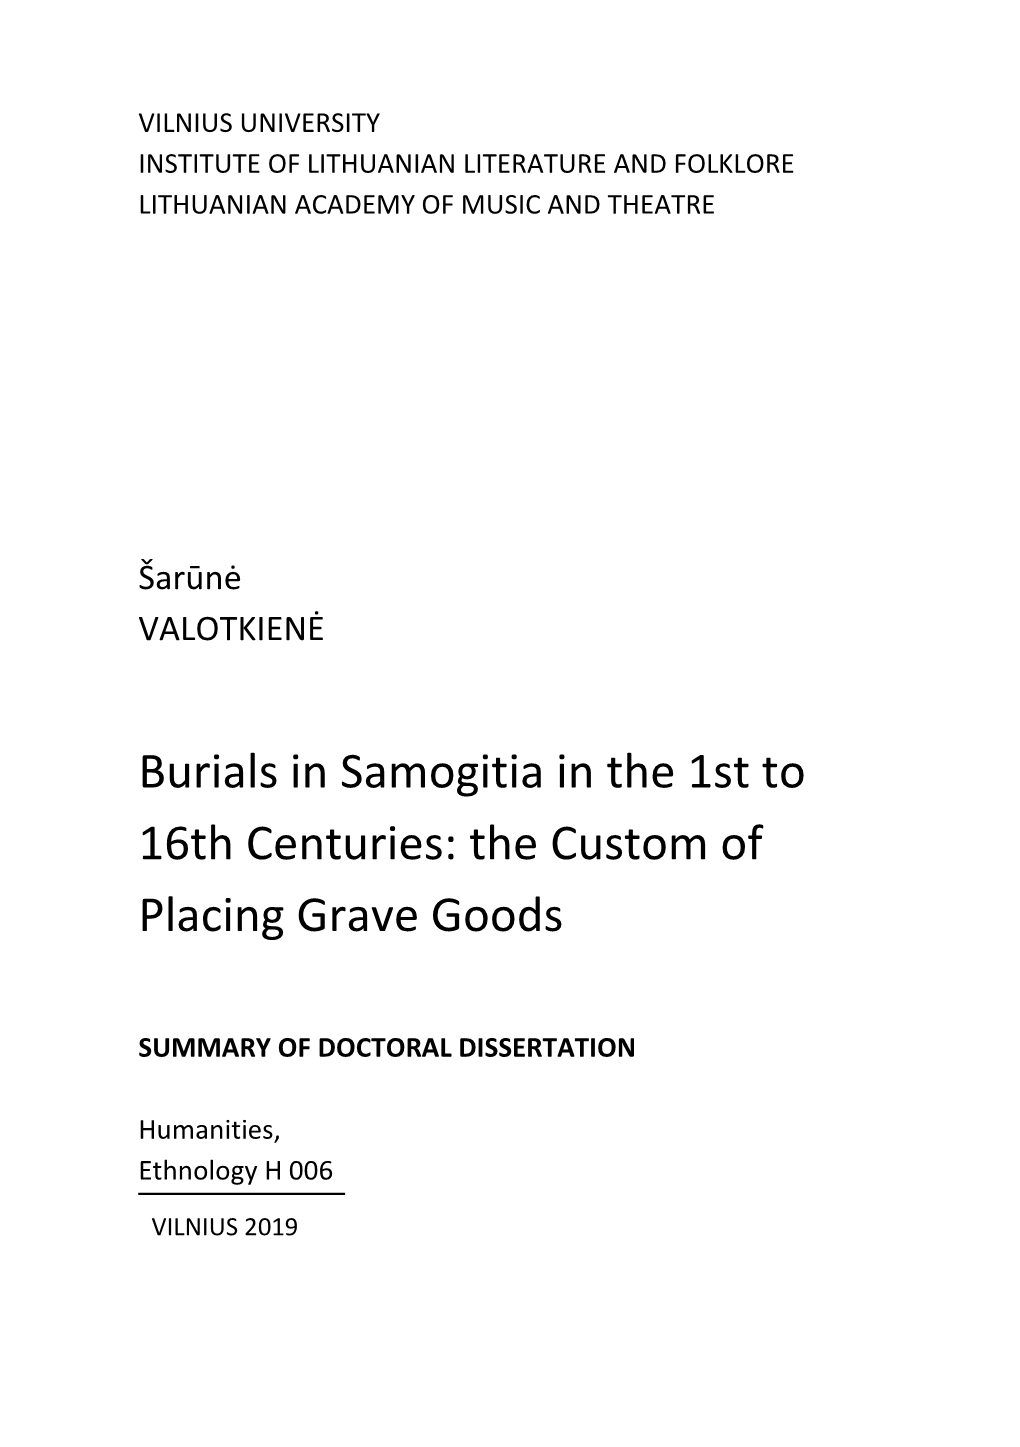 Burials in Samogitia in the 1St to 16Th Centuries: the Custom of Placing Grave Goods